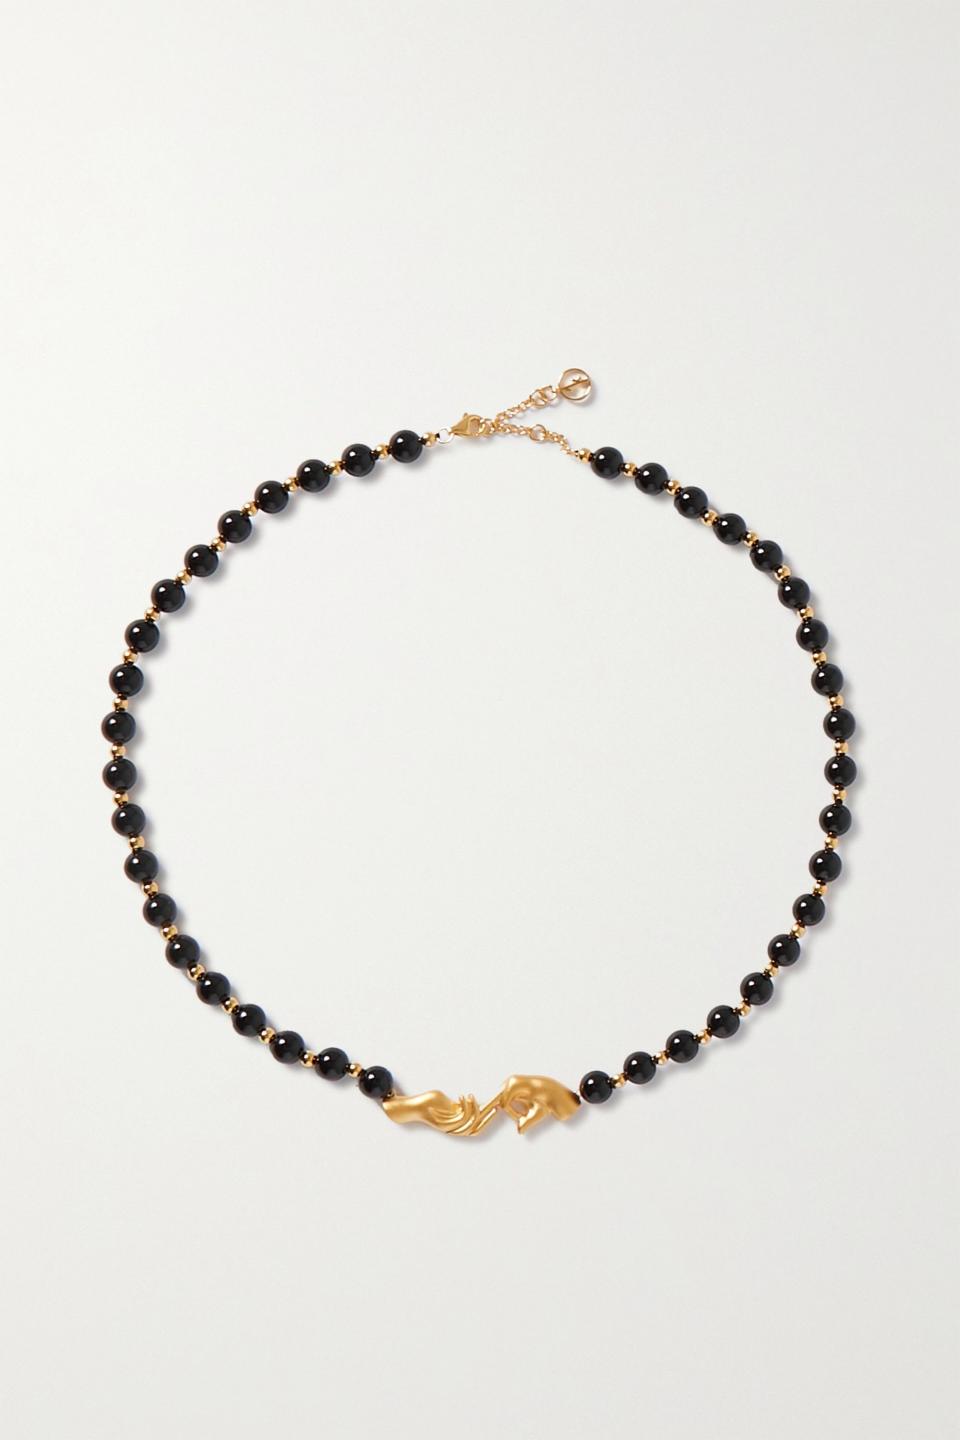 10) Les Mains Gold-Plated Onyx Necklace